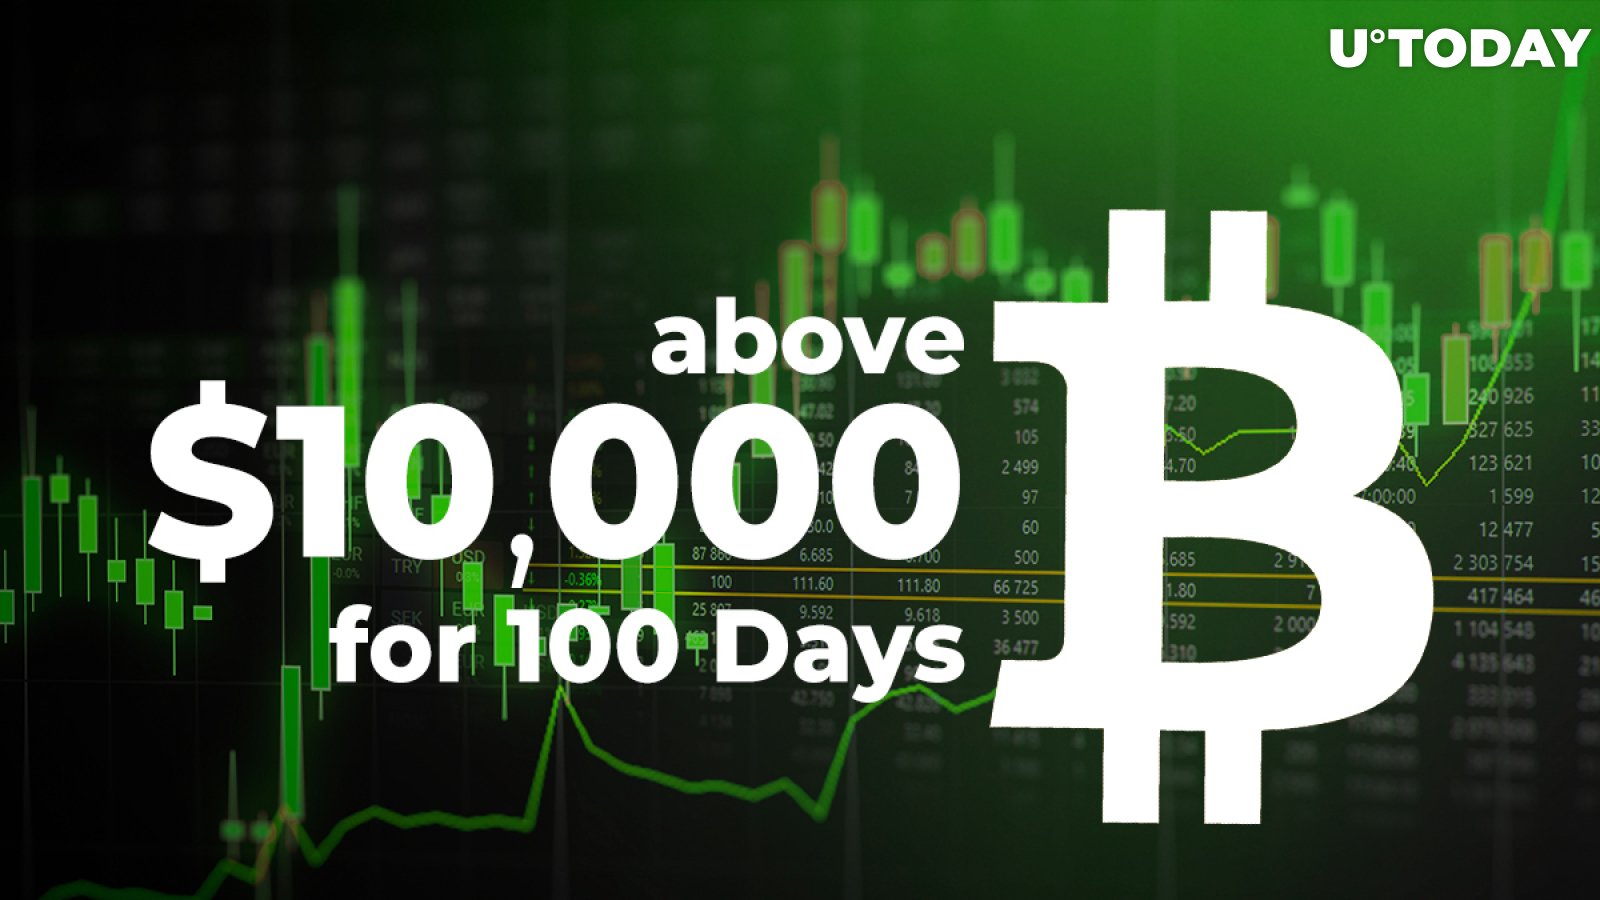 Bitcoin (BTC) Has Set Record of Staying Above $10,000 for Over 3 Months: Details